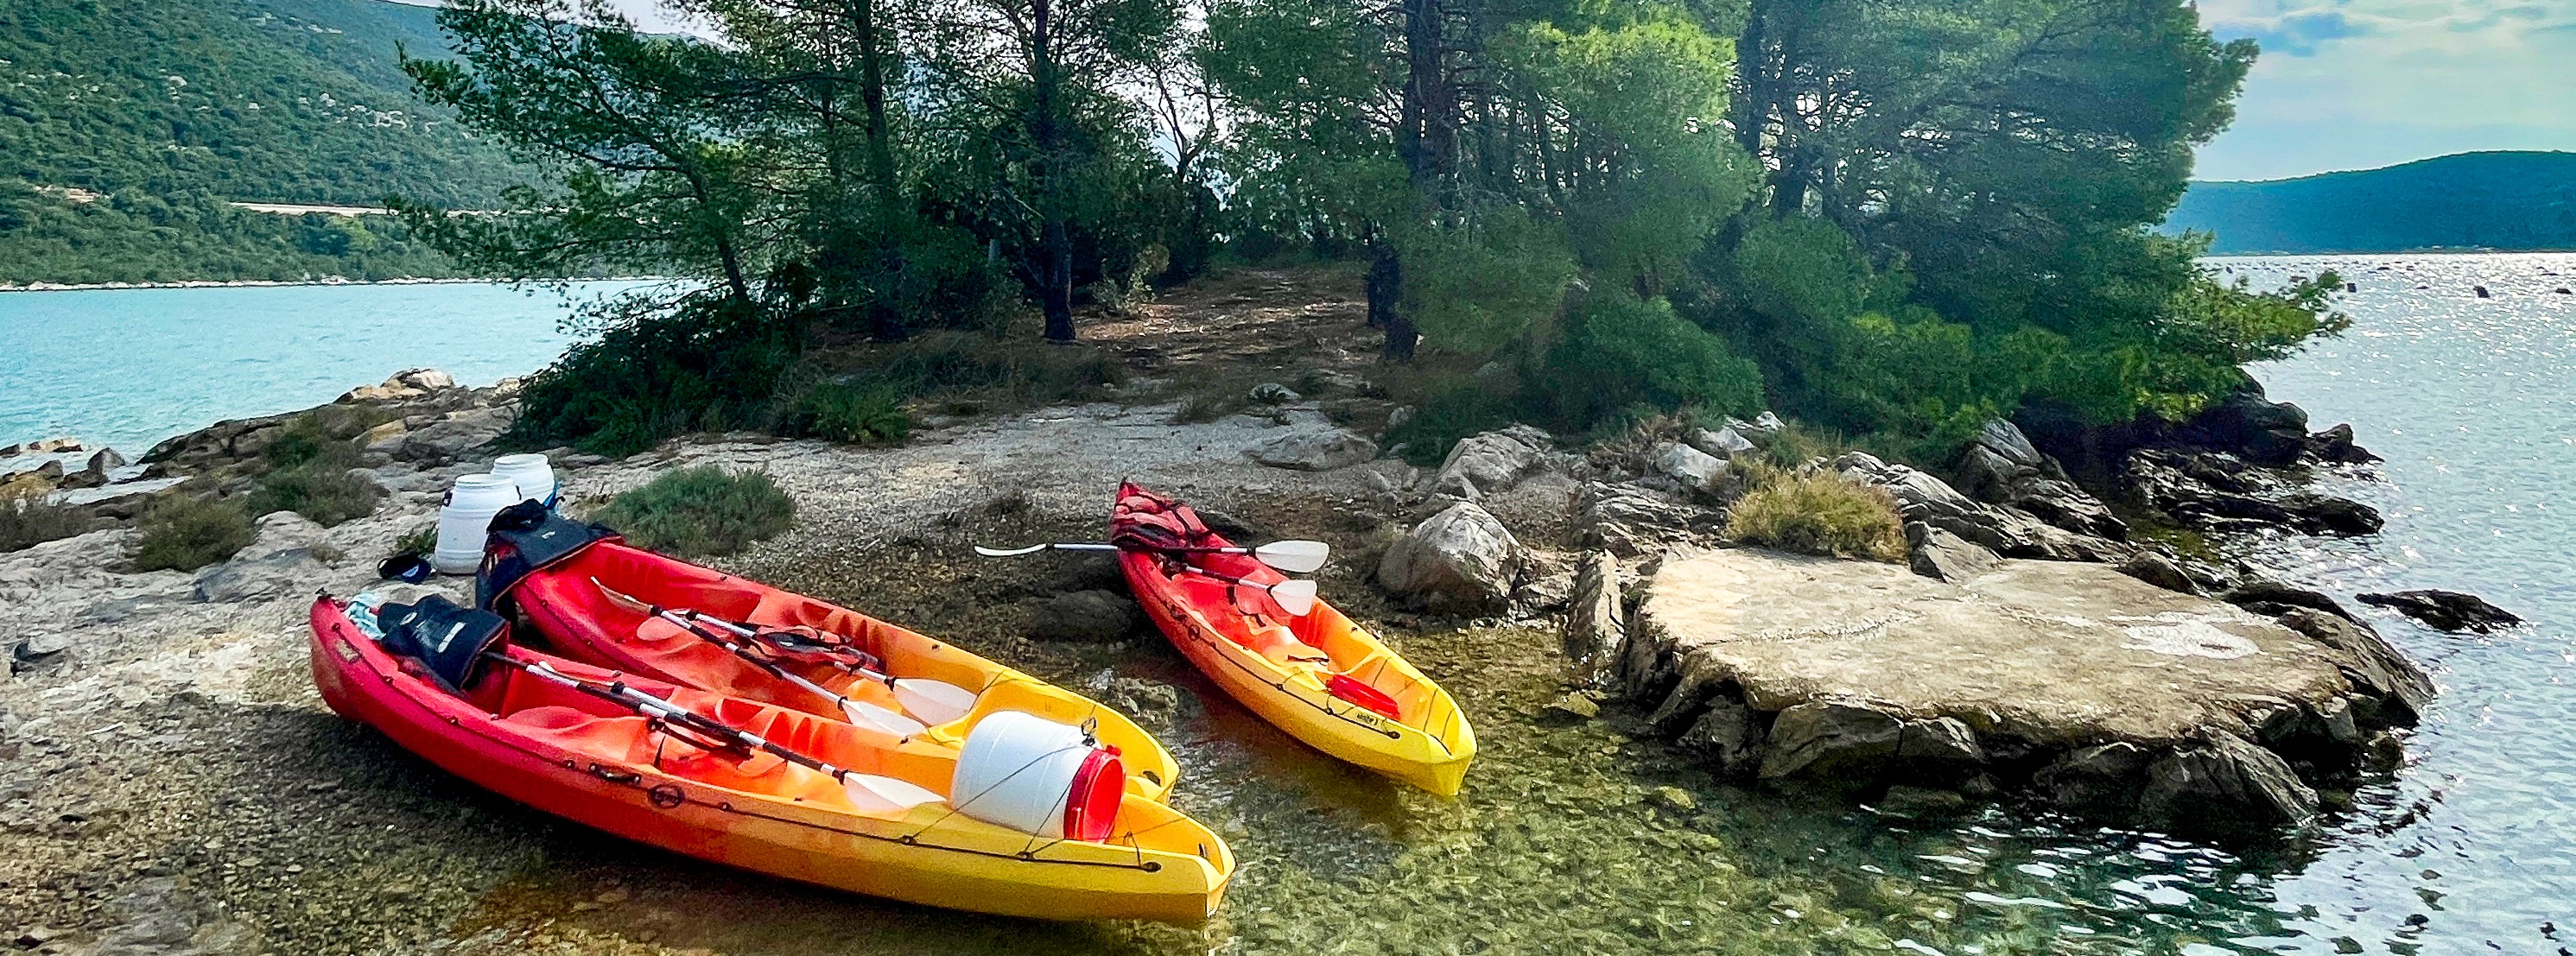 tourhub | Undiscovered Balkans | 7 Day Multi-Activity Holiday in Southern Dalmatia | CRO-MA7